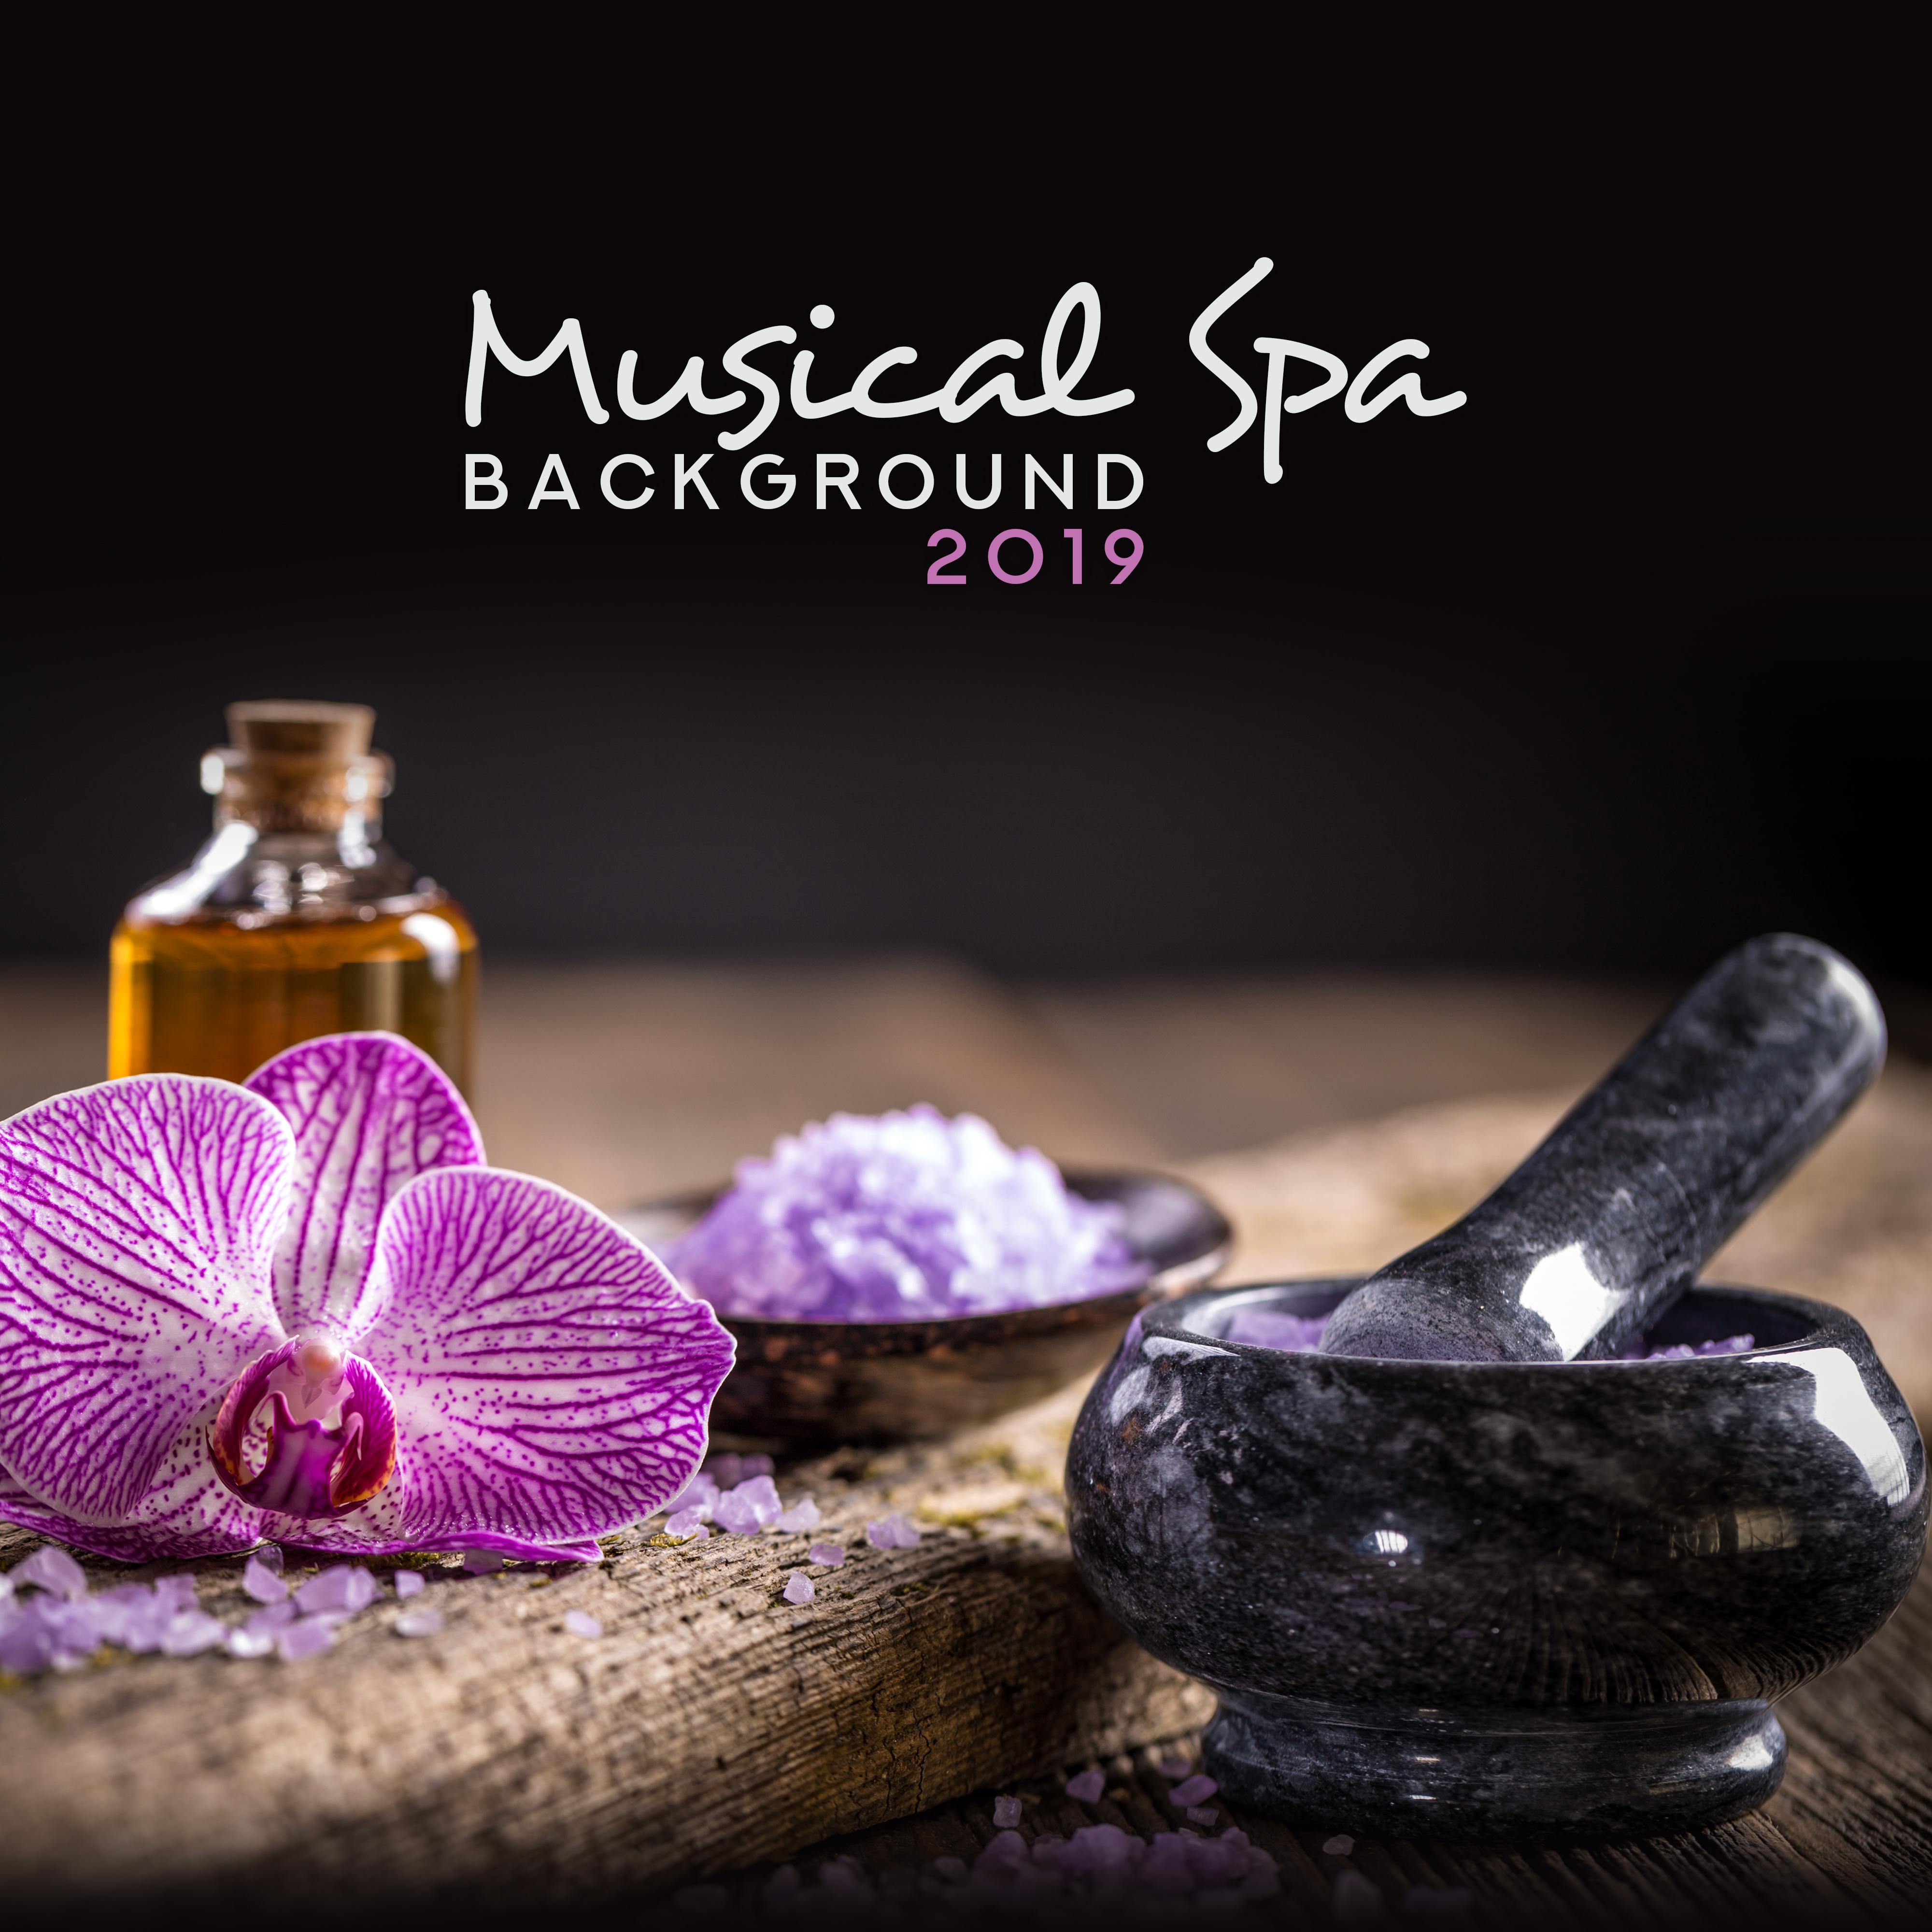 Musical Spa Background 2019